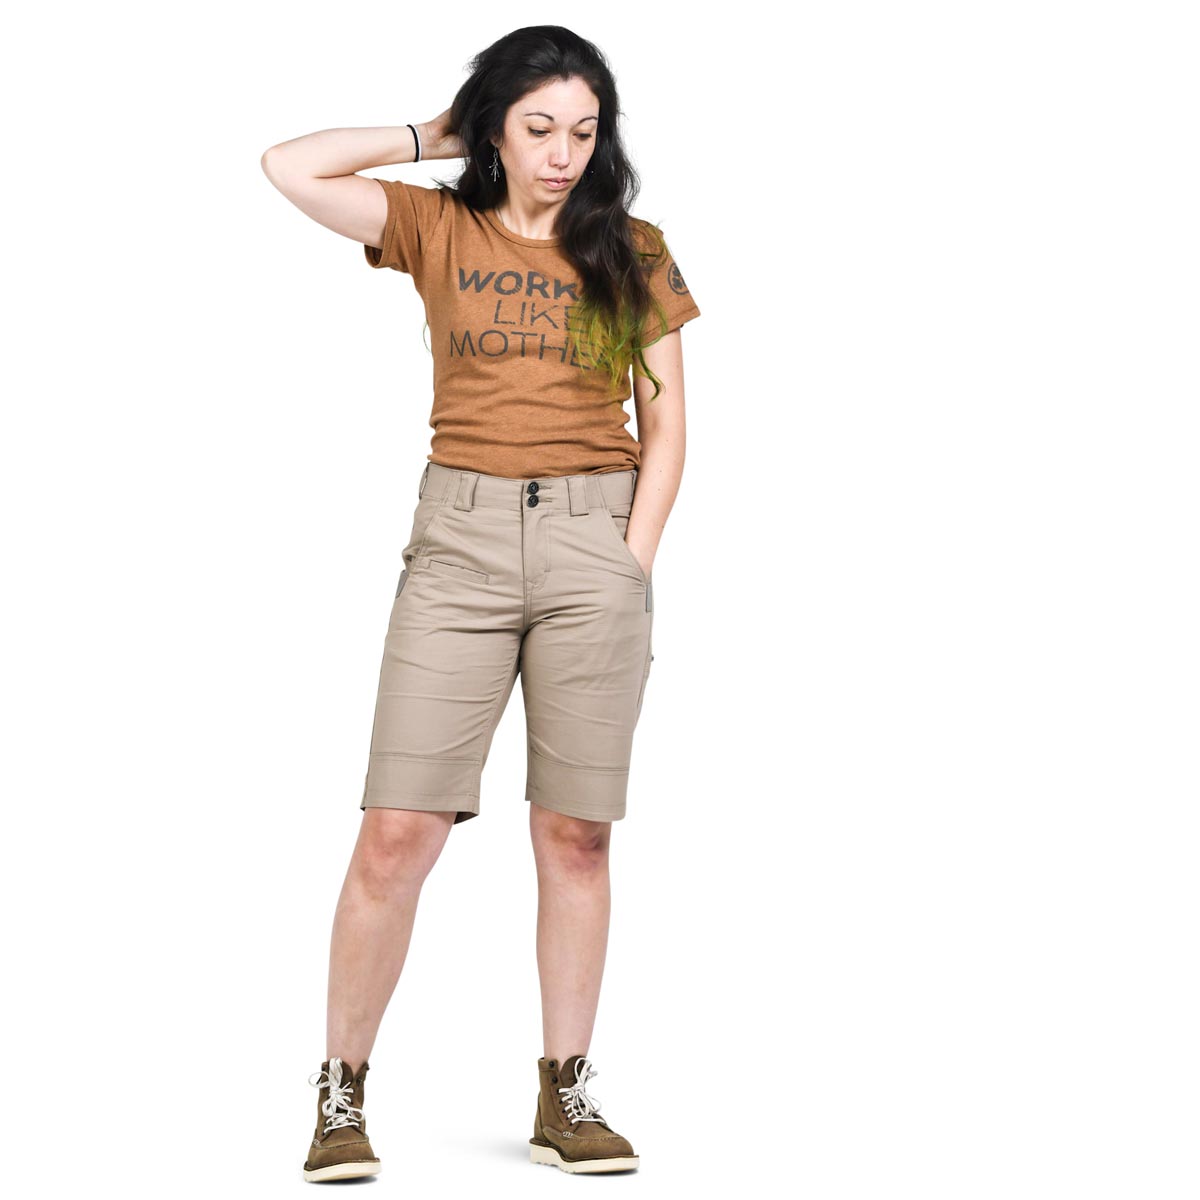 Dovetail Workwear Women's Graphic Crew-Work Like a Mother-Saddle Brown